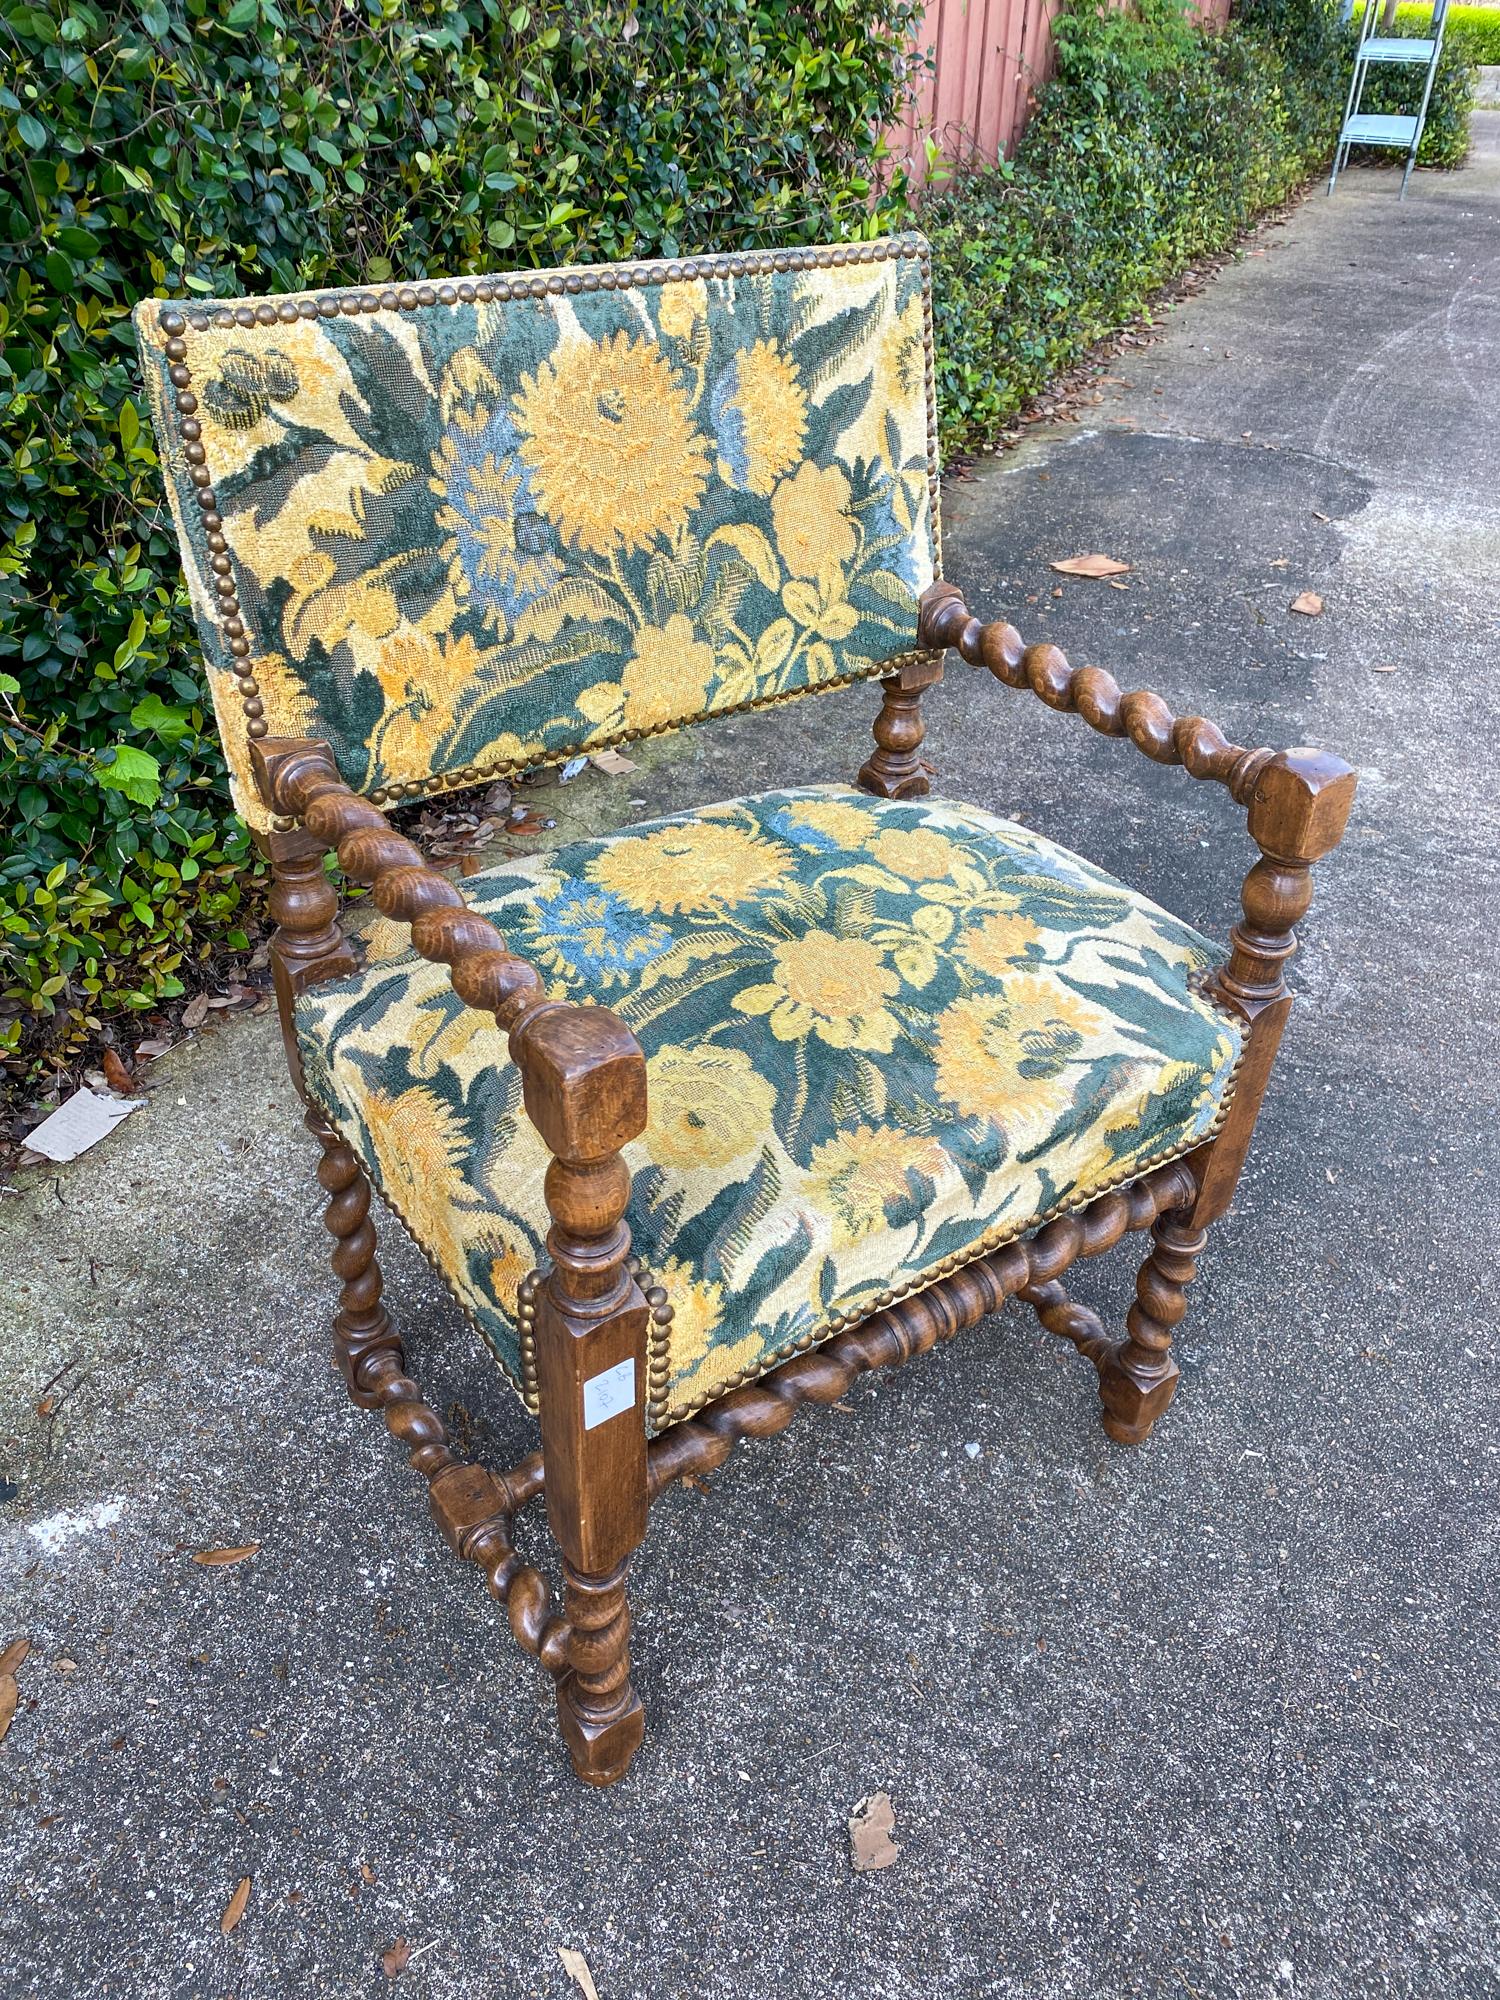 This is an antique French barley-twist armchair with floral upholstery and brass nail head accents. The barley twist style is present on the arms and legs, carved in French oak, with original finish. Made around the turn of the 20th century, circa